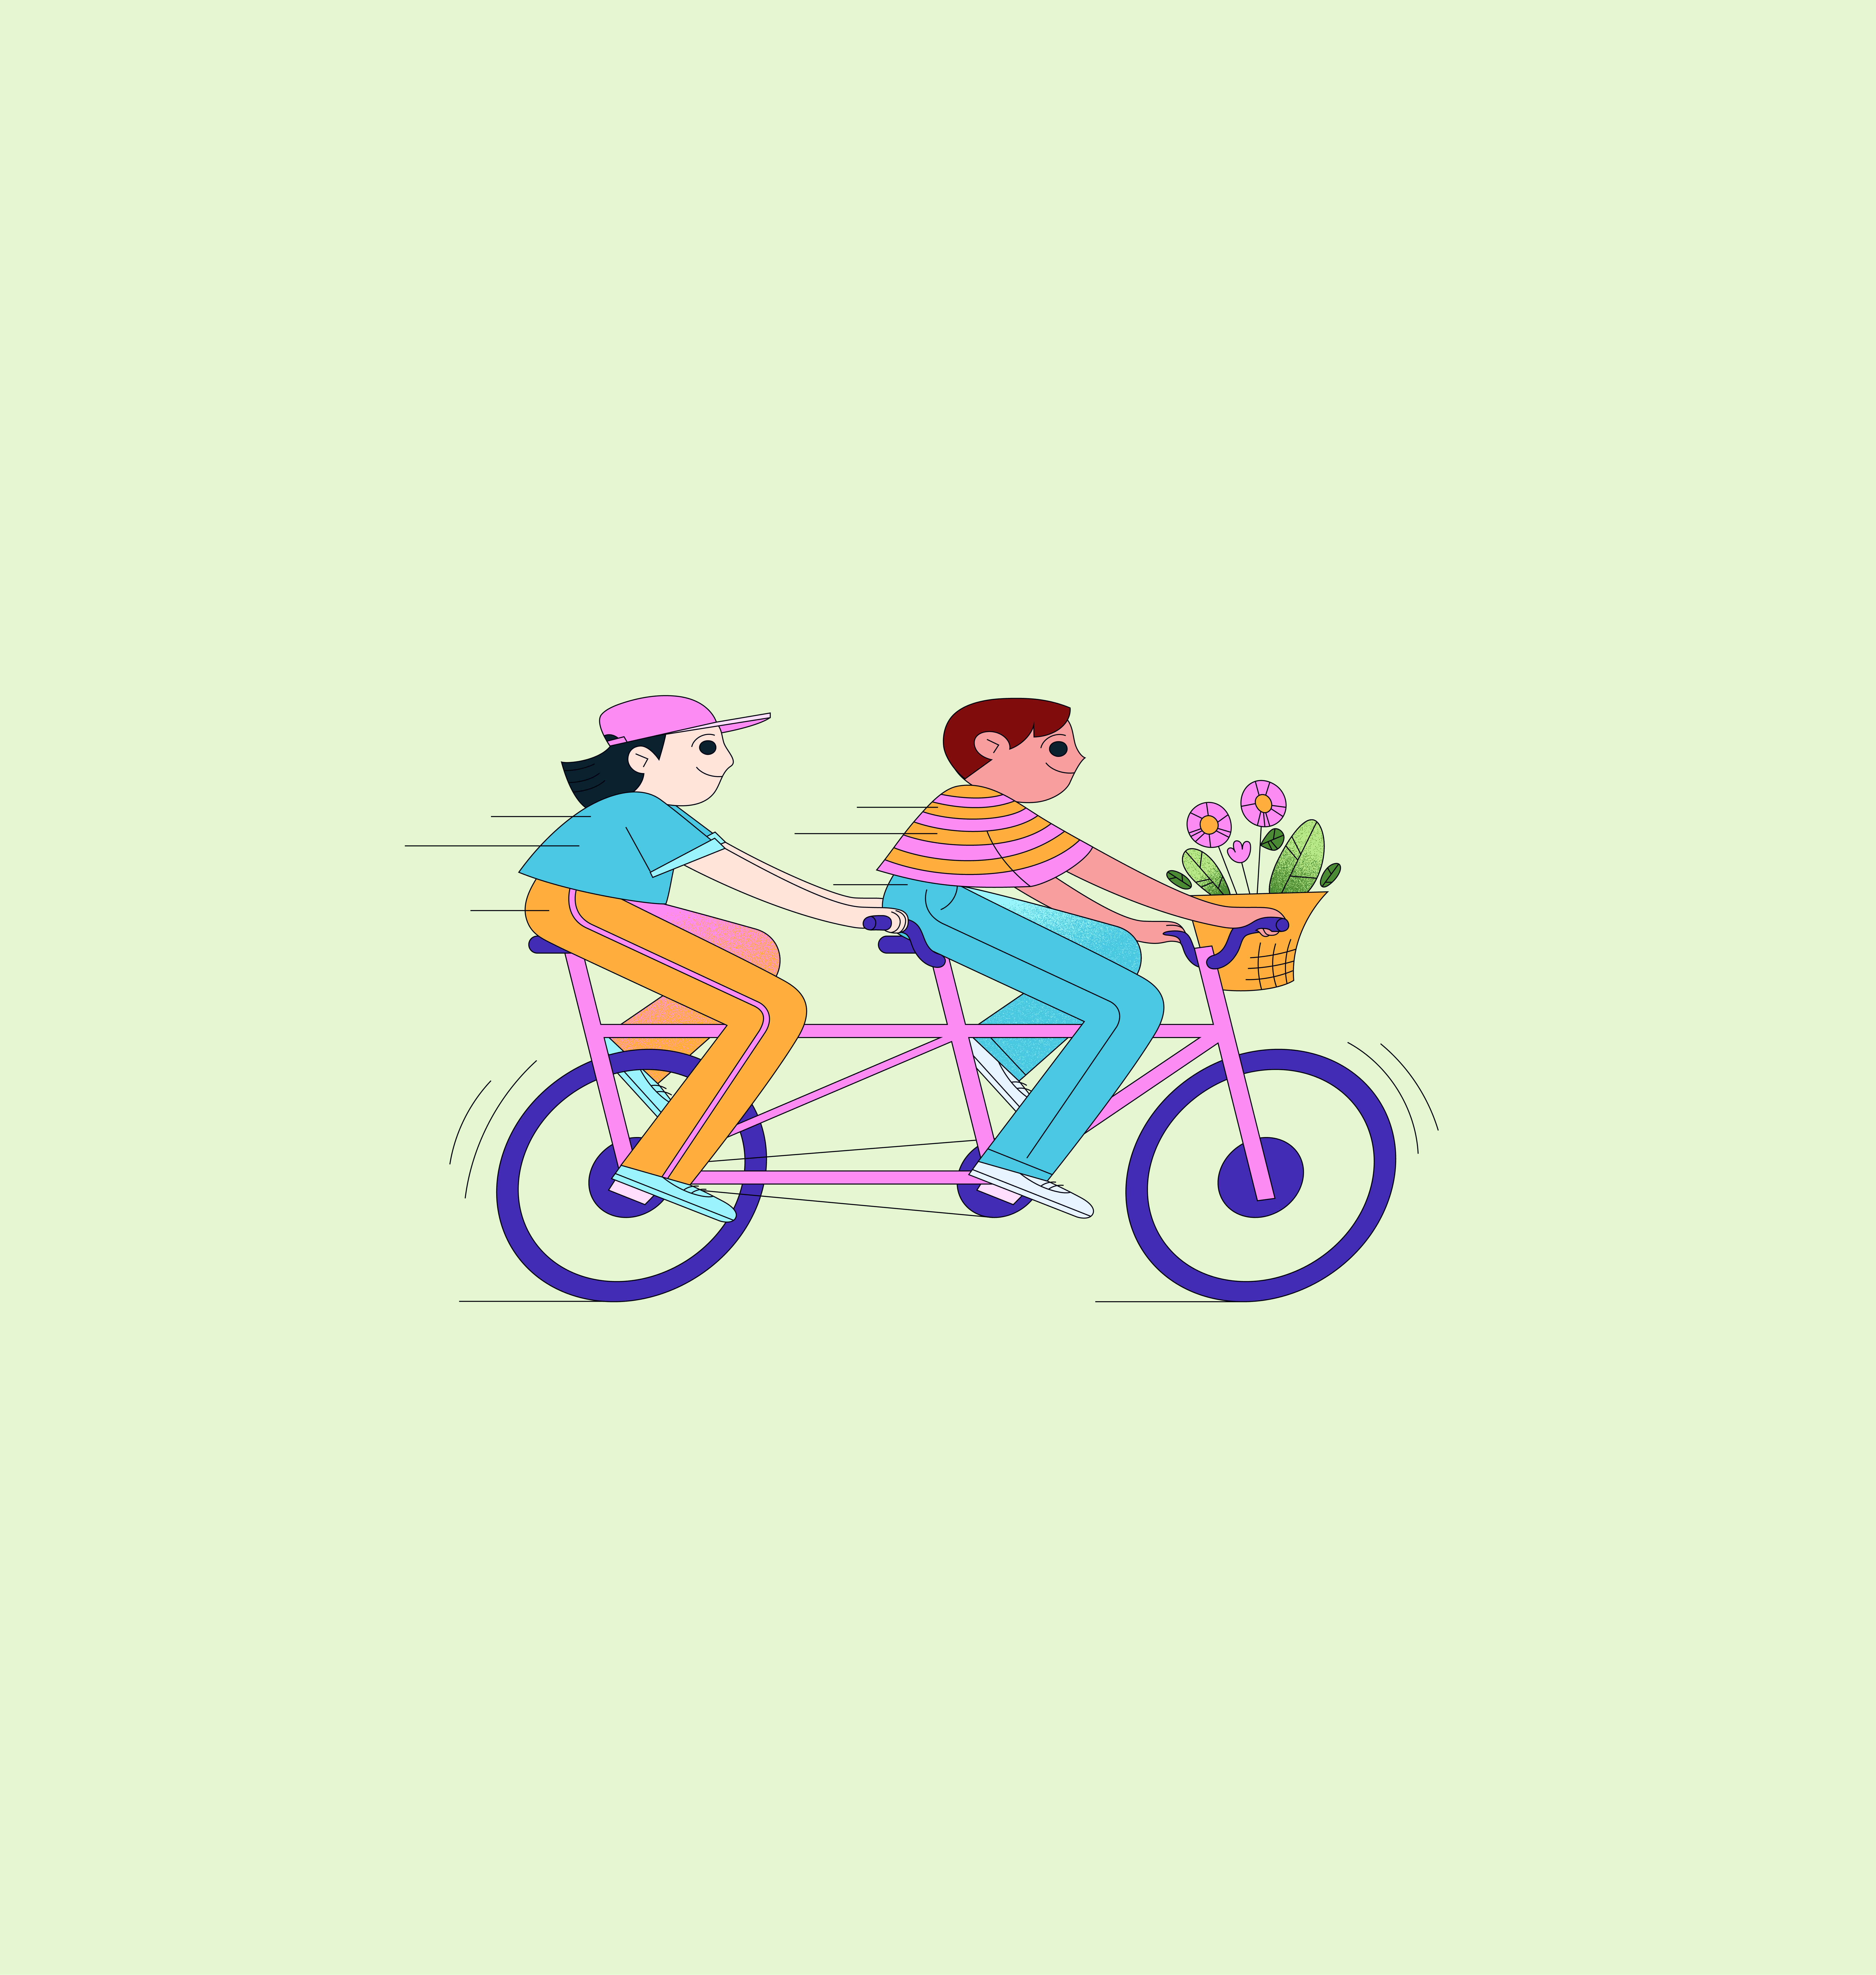 Illustration of two people on a tandem bike.